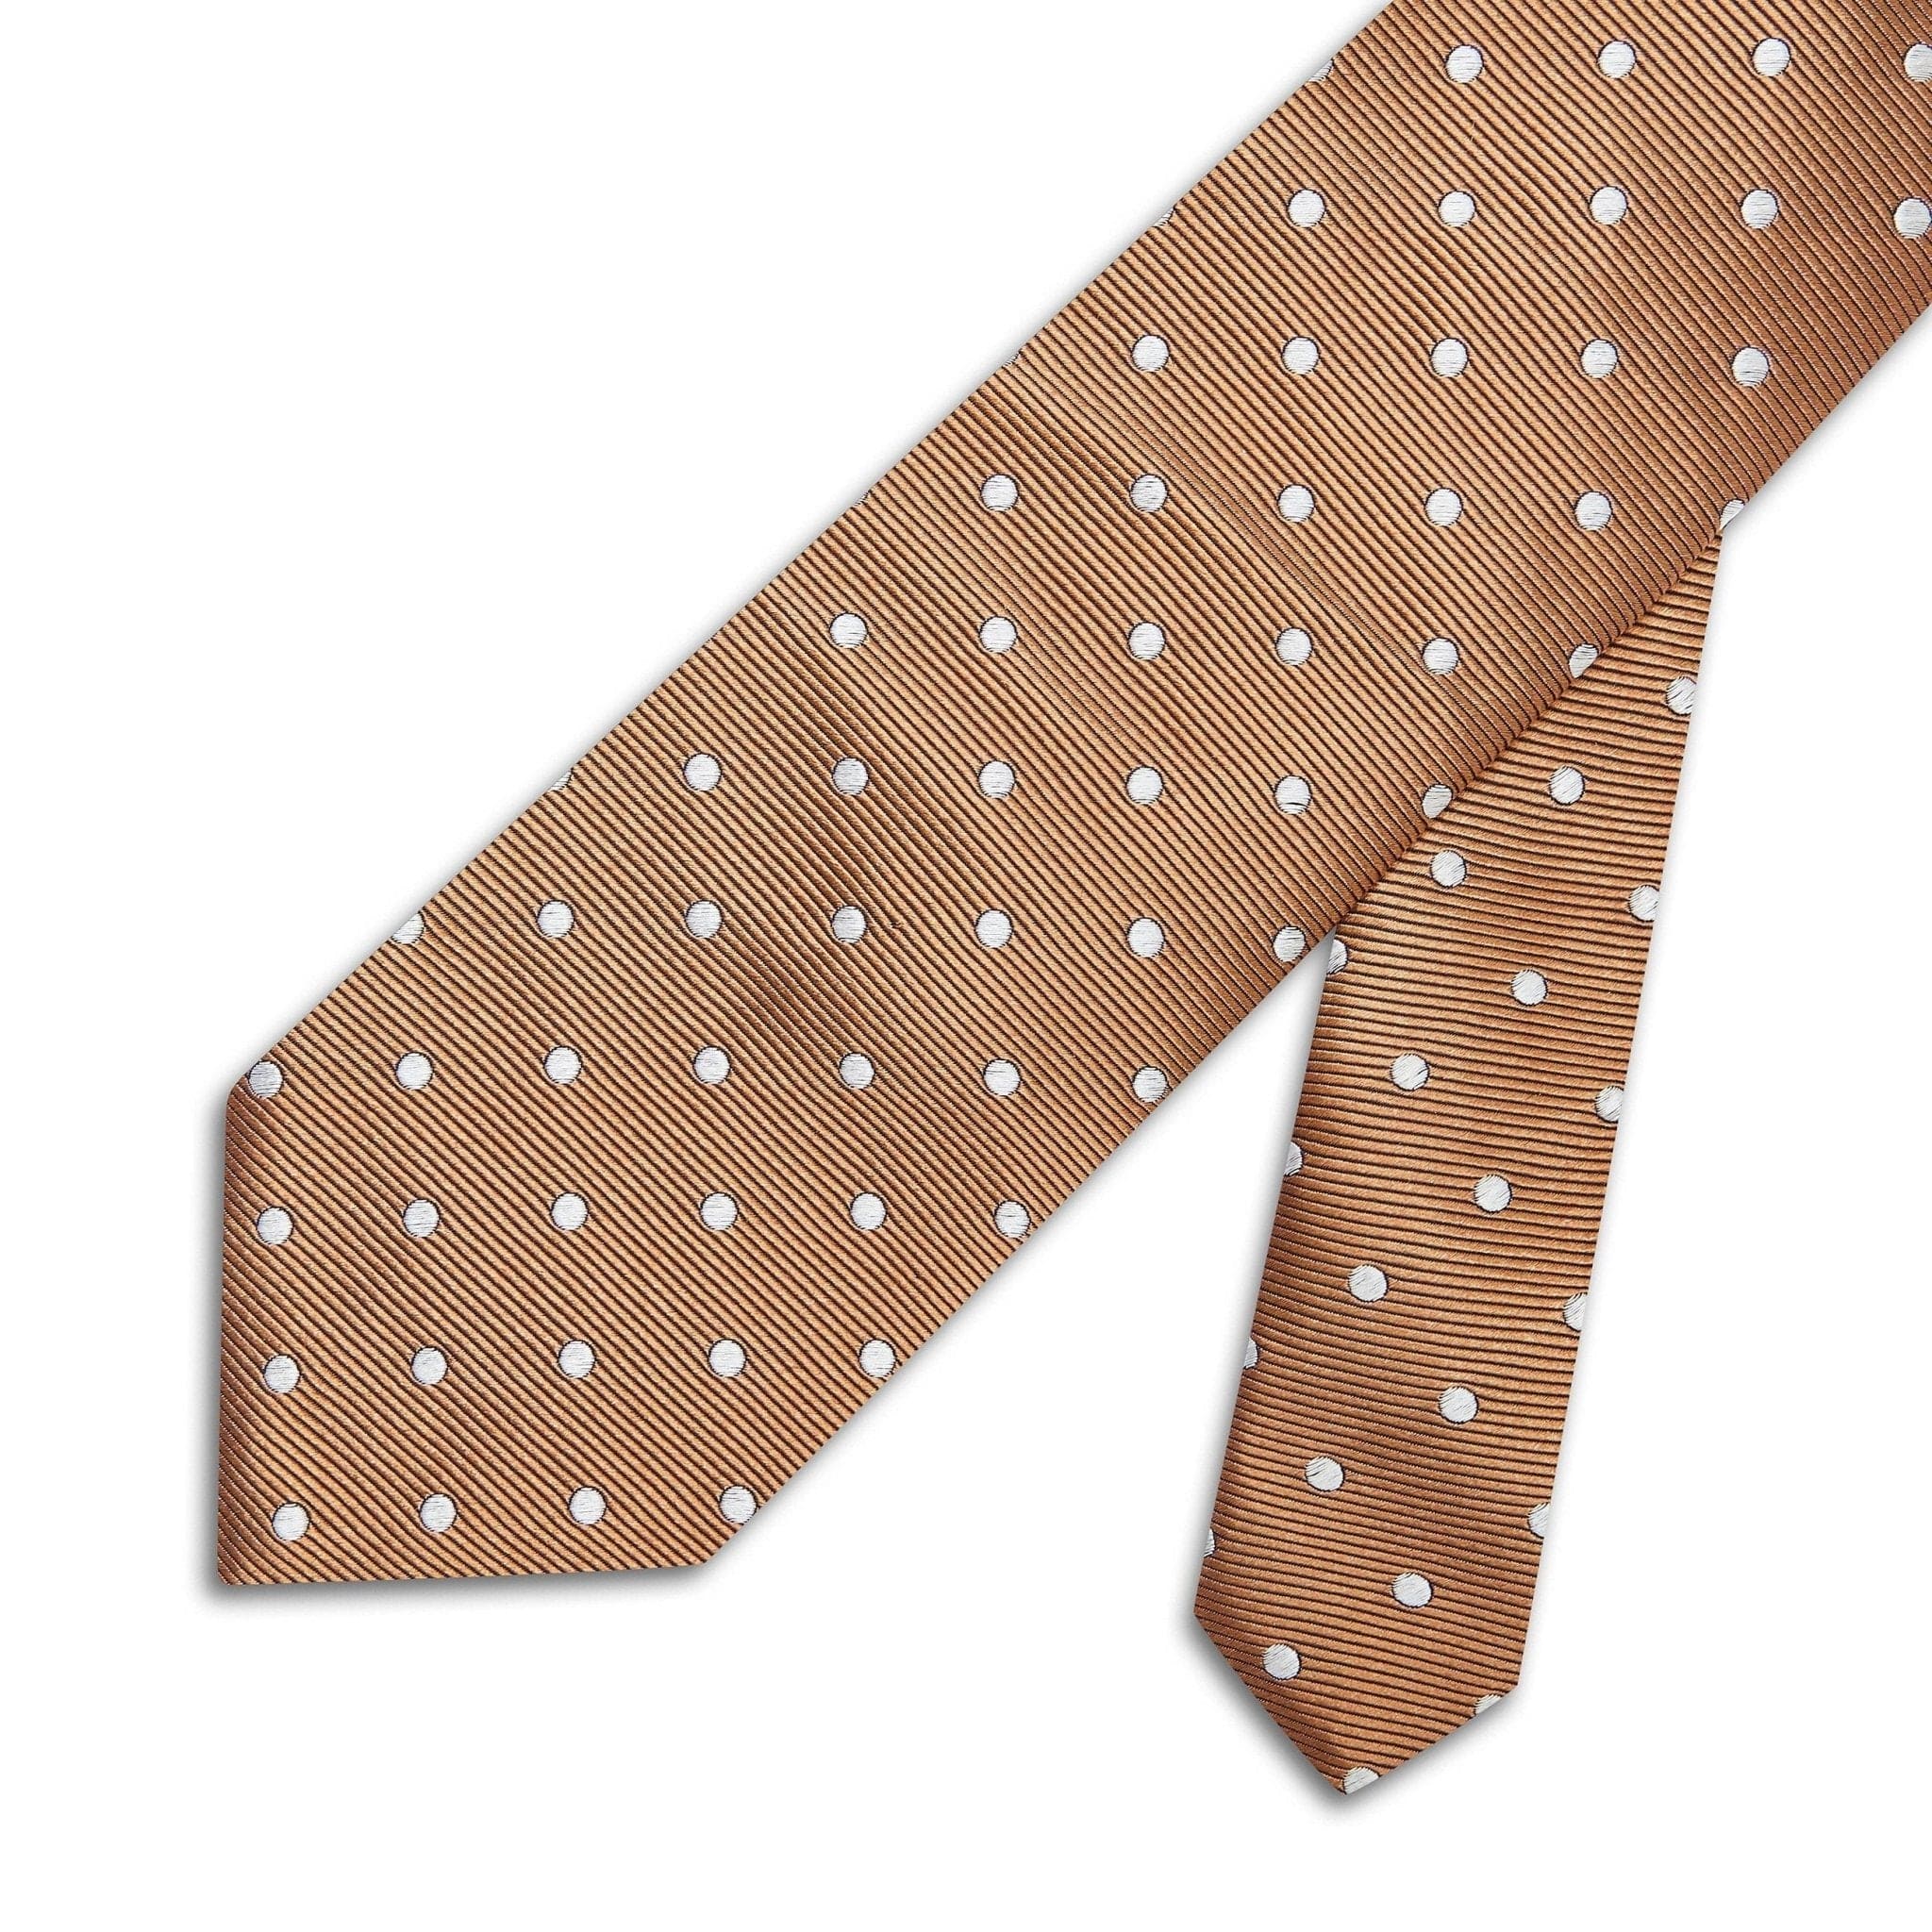 Tan Twill with White Spots Woven Silk Tie